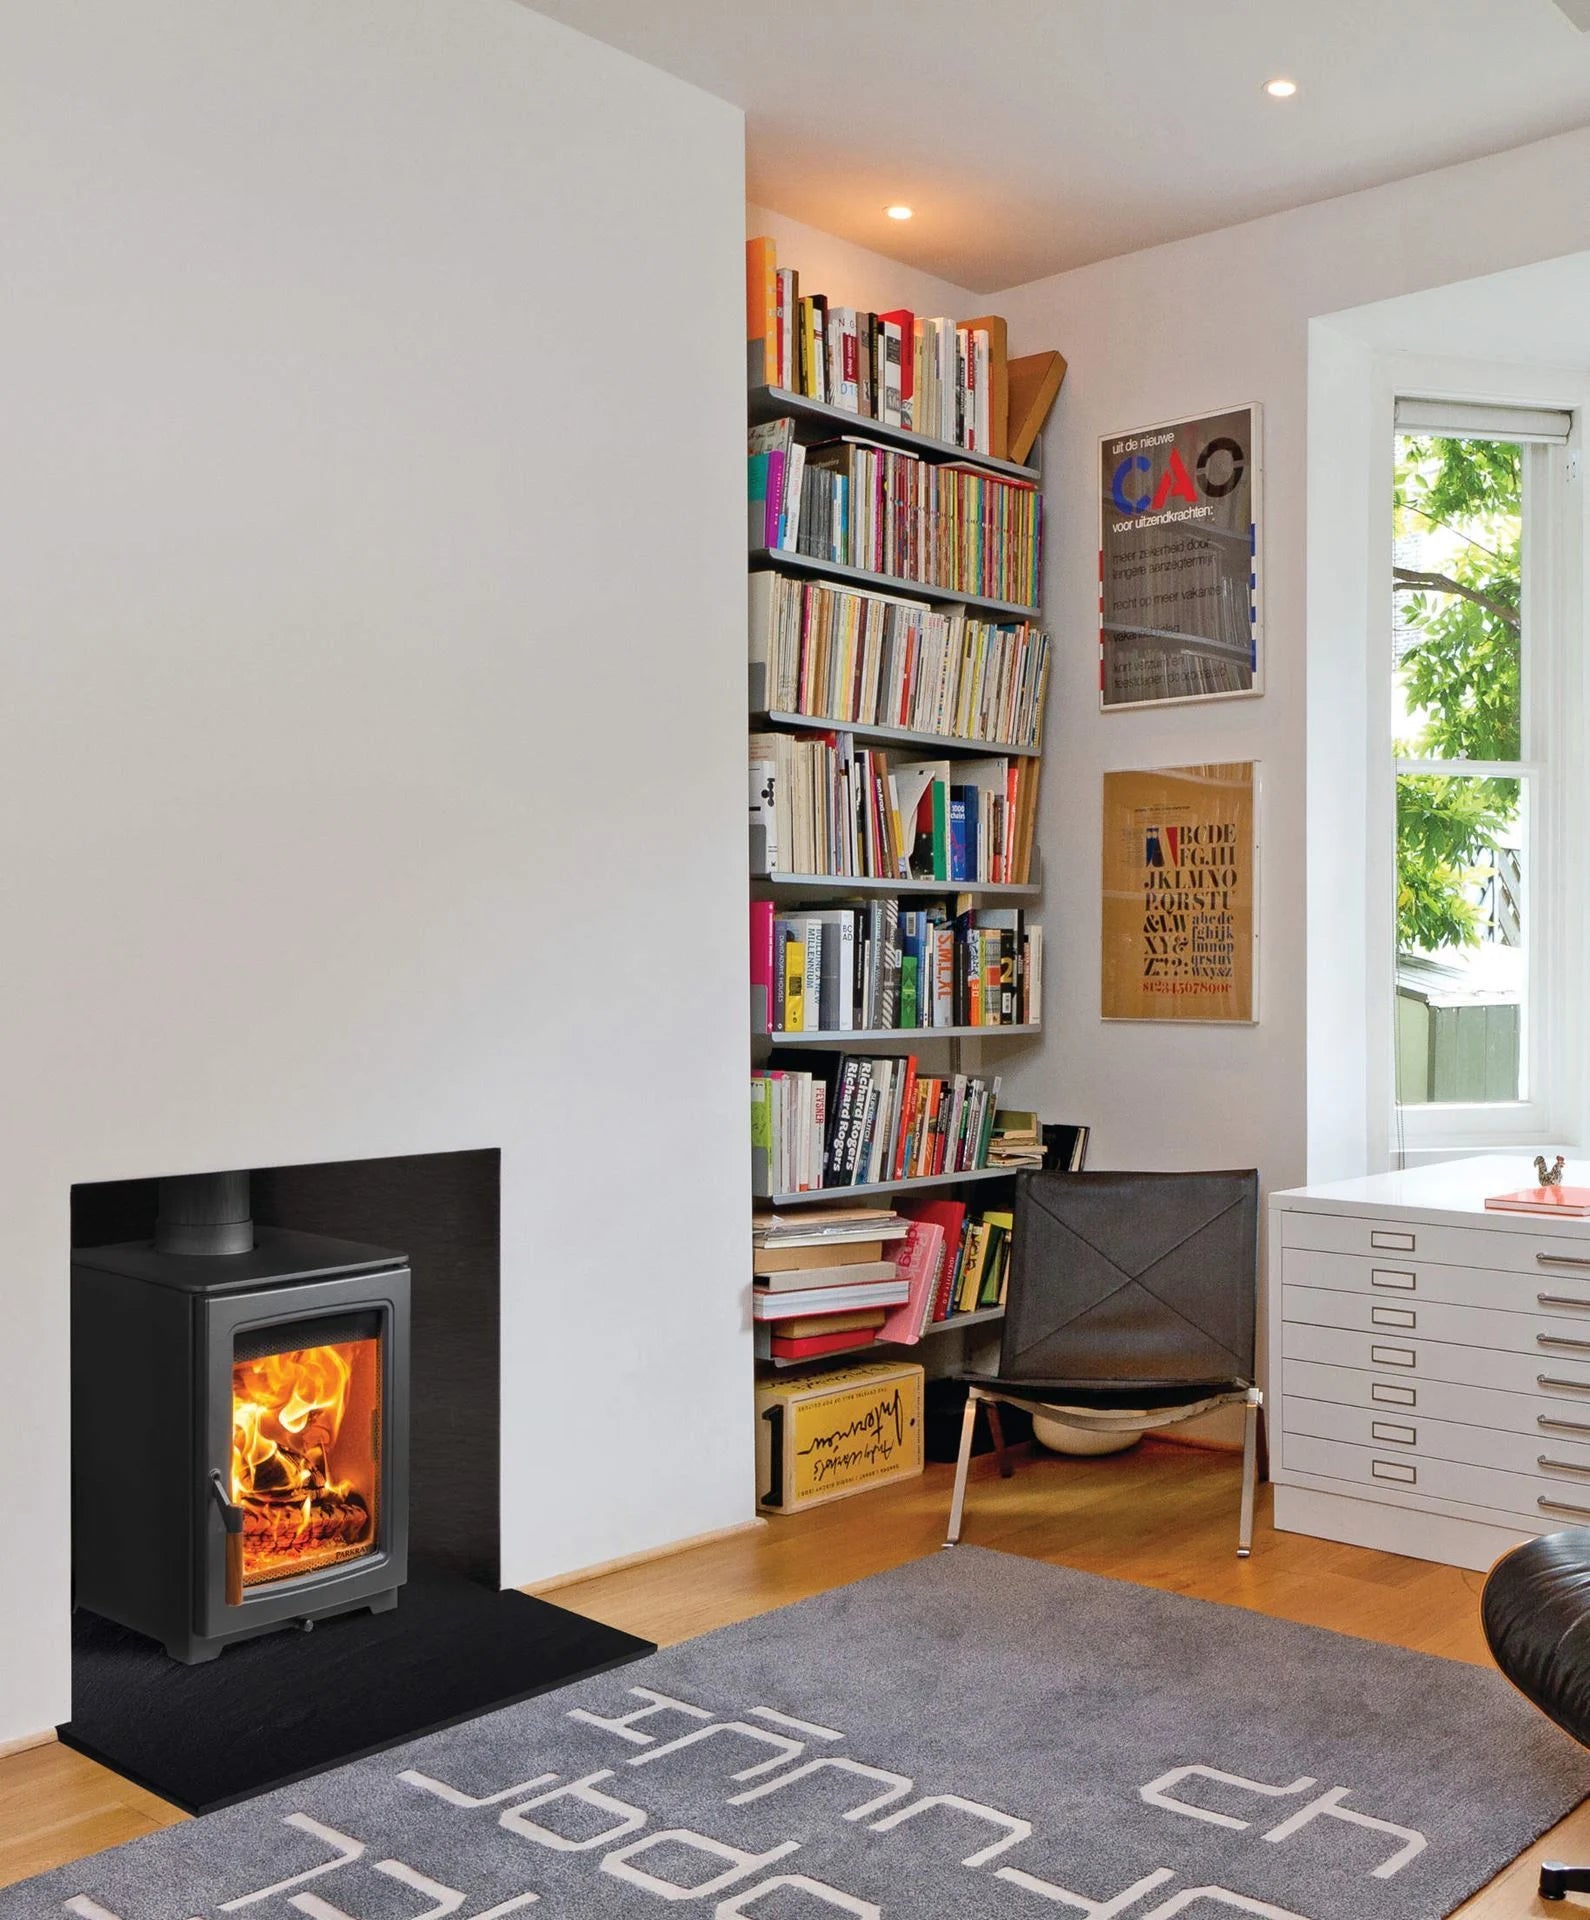 Parkray Aspect 4 Standard DEFRA Approved Wood Burning Stove - Nuovo Luxury